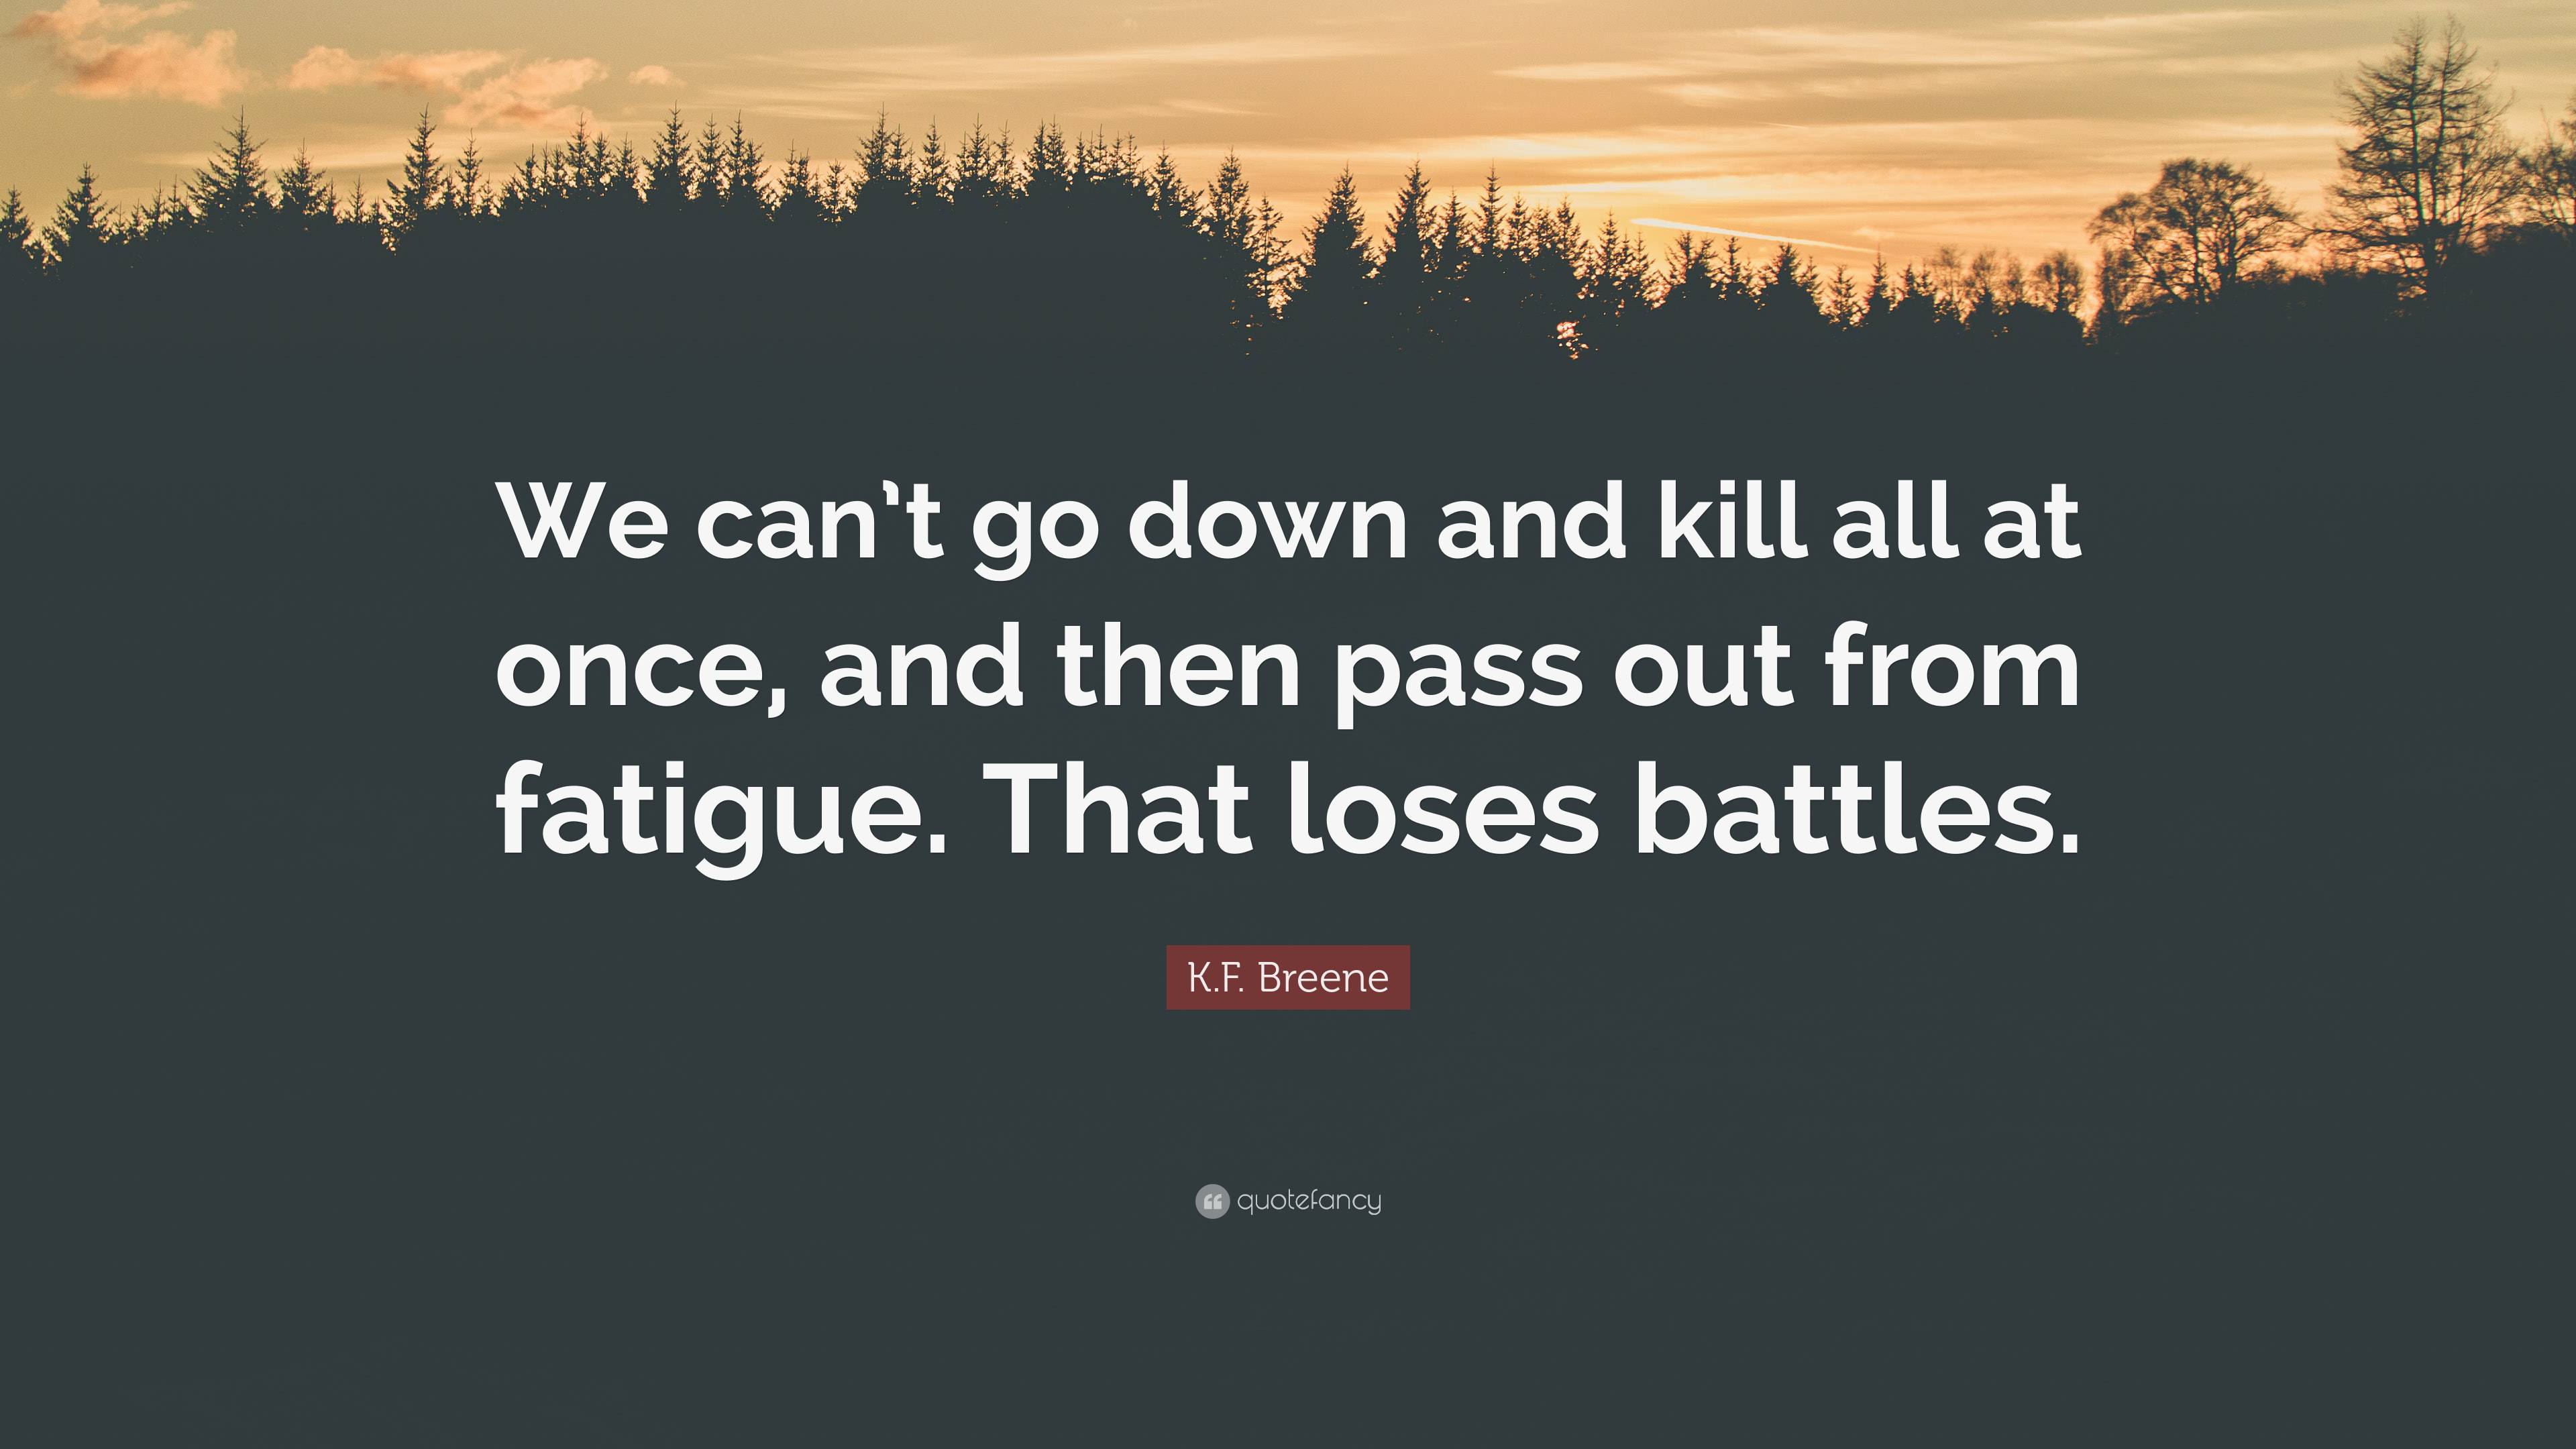 K.F. Breene Quote: “We can’t go down and kill all at once, and then ...